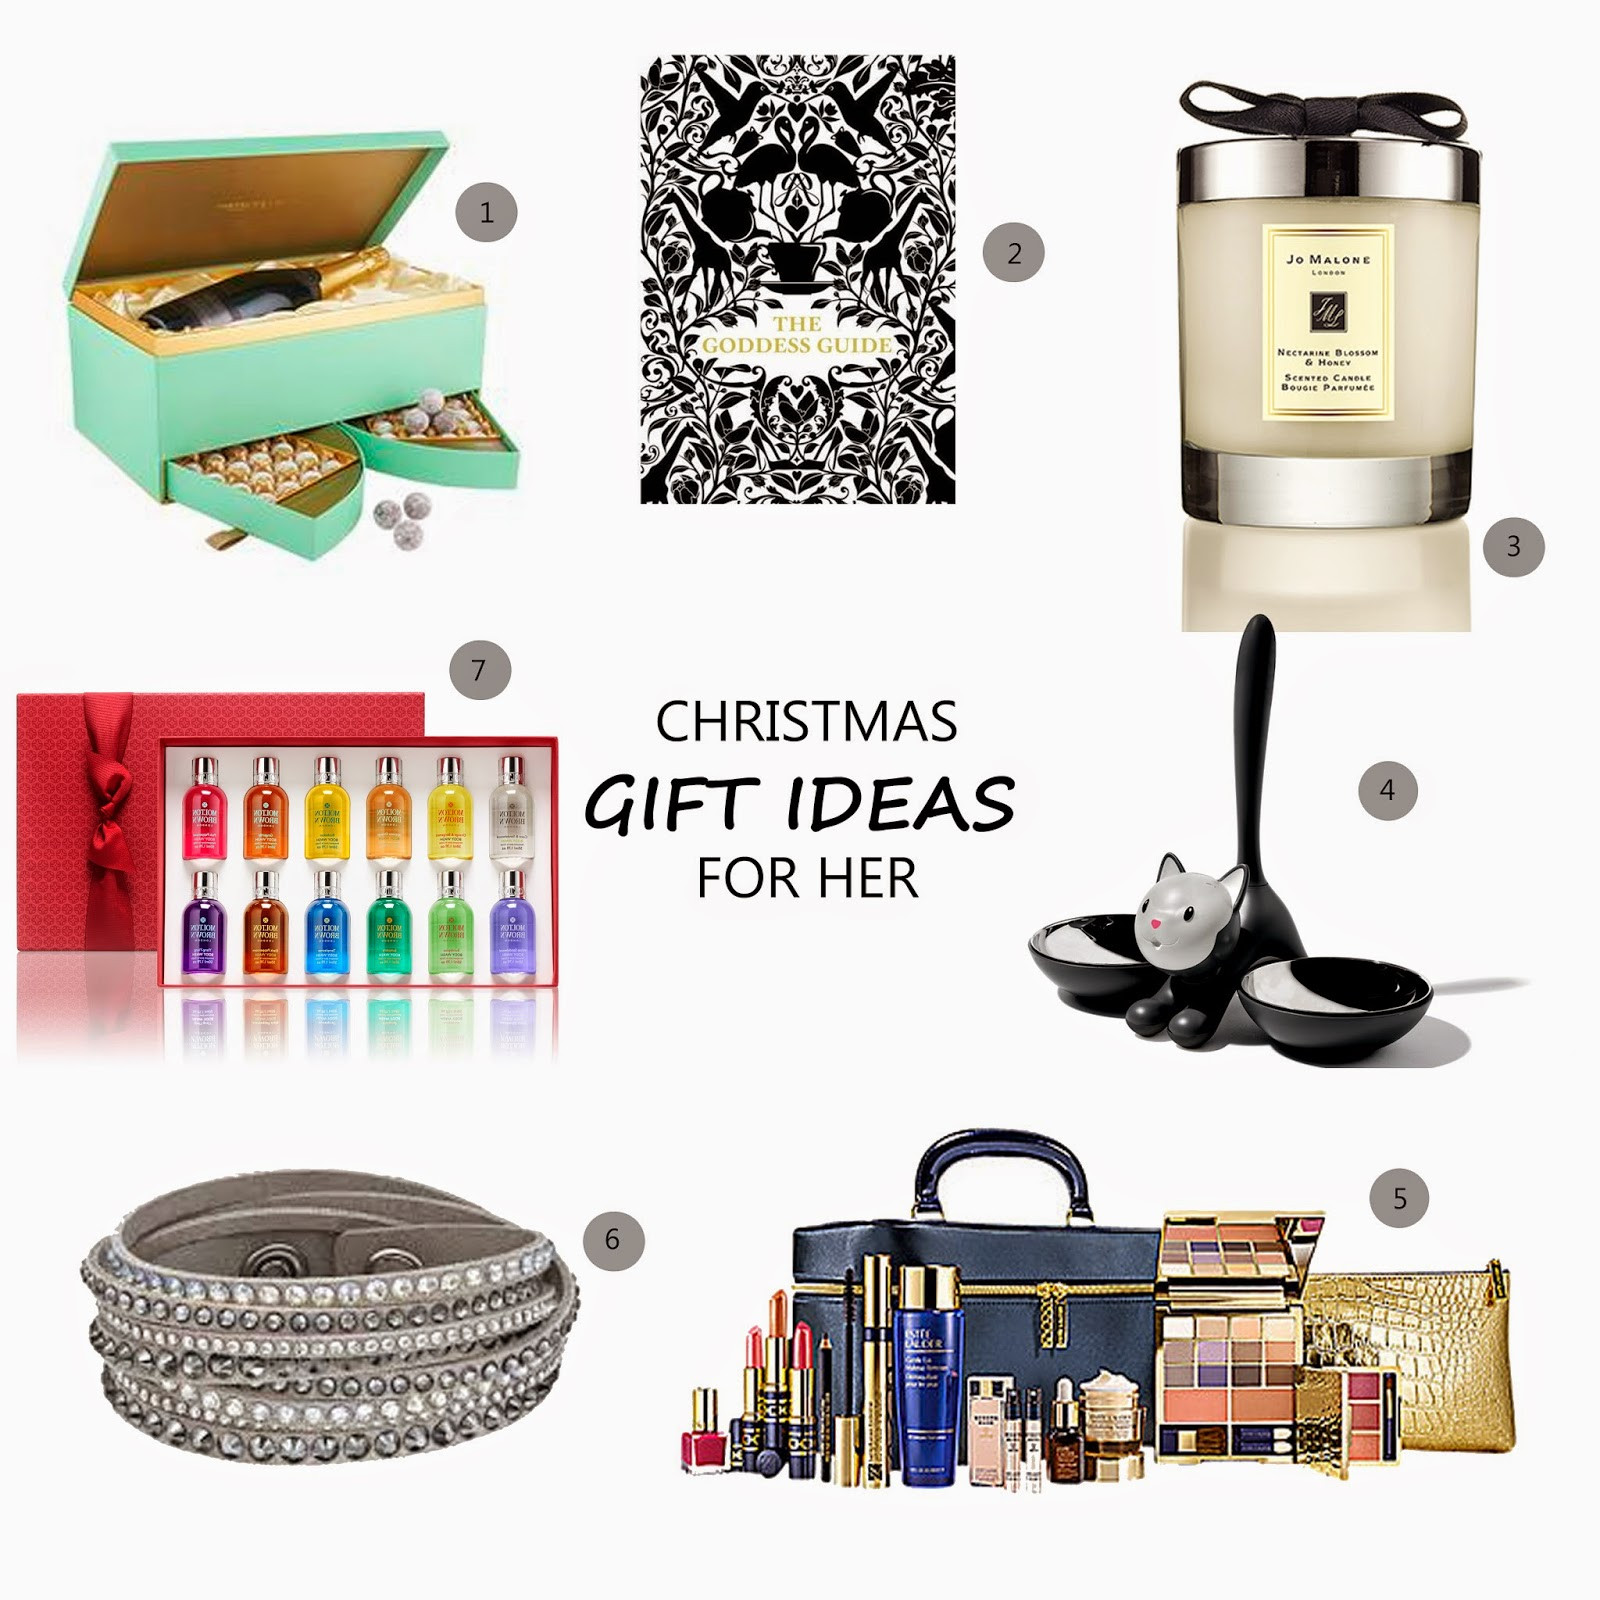 Gift Ideas For Her Christmas
 7 Christmas Gift Ideas for Her Loved By Laura